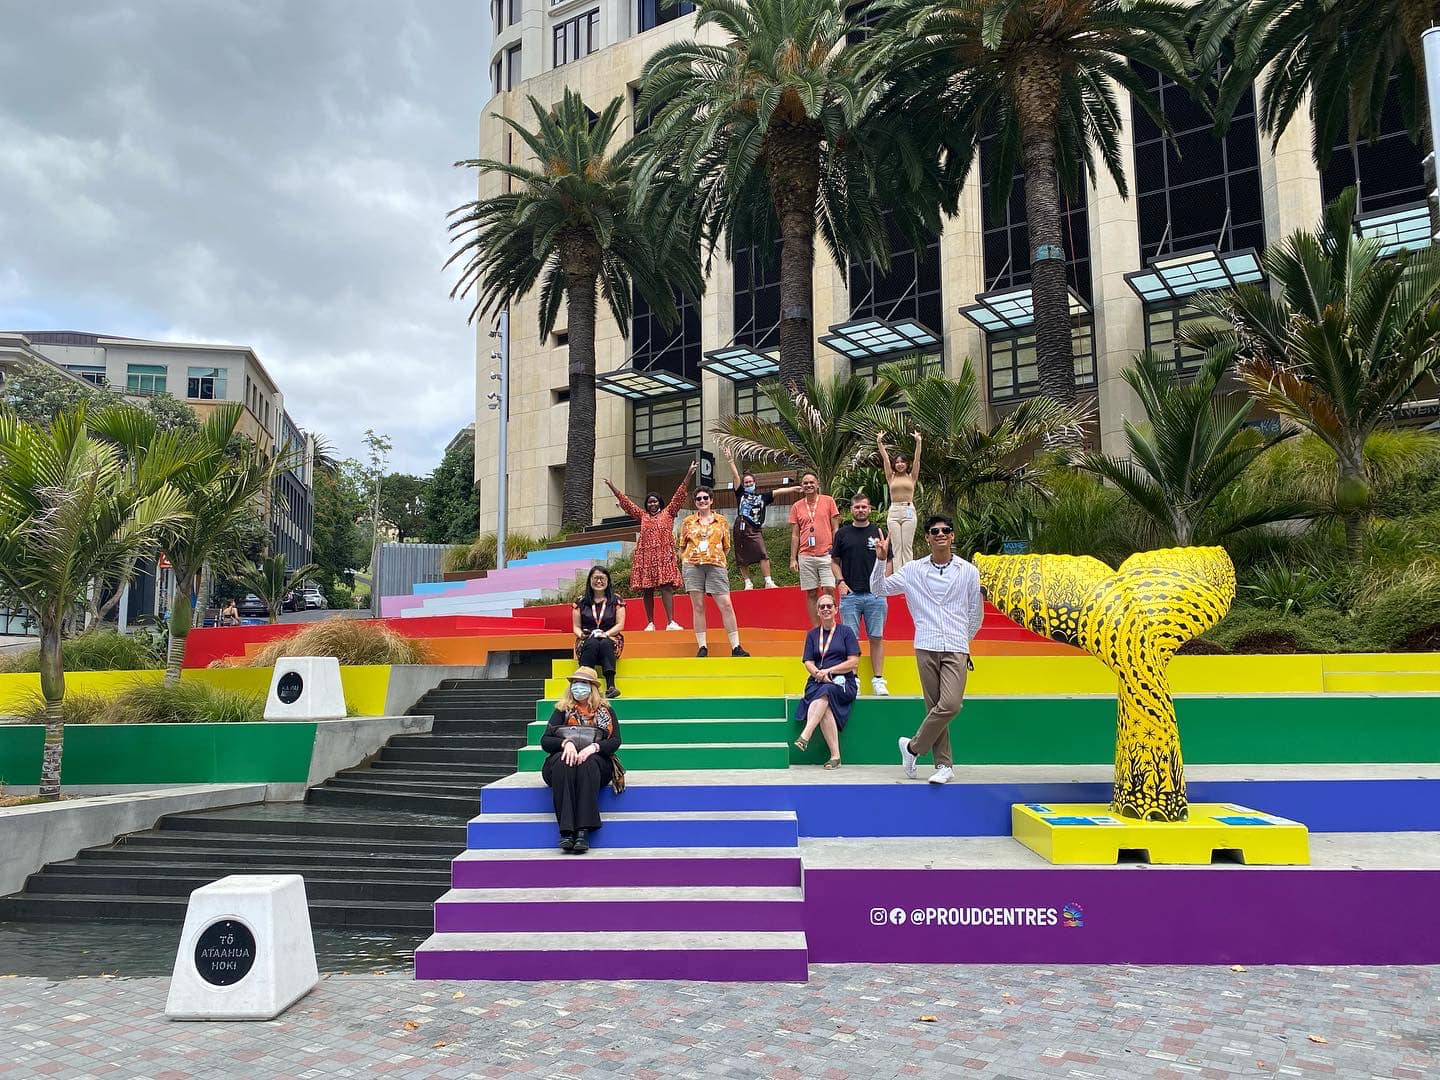 Met our amazing Communities Team on The Freyberg Steps that have been updated this year to incorporate the Progressive (Inclusivity) Flag designed by Daniel Quasar.